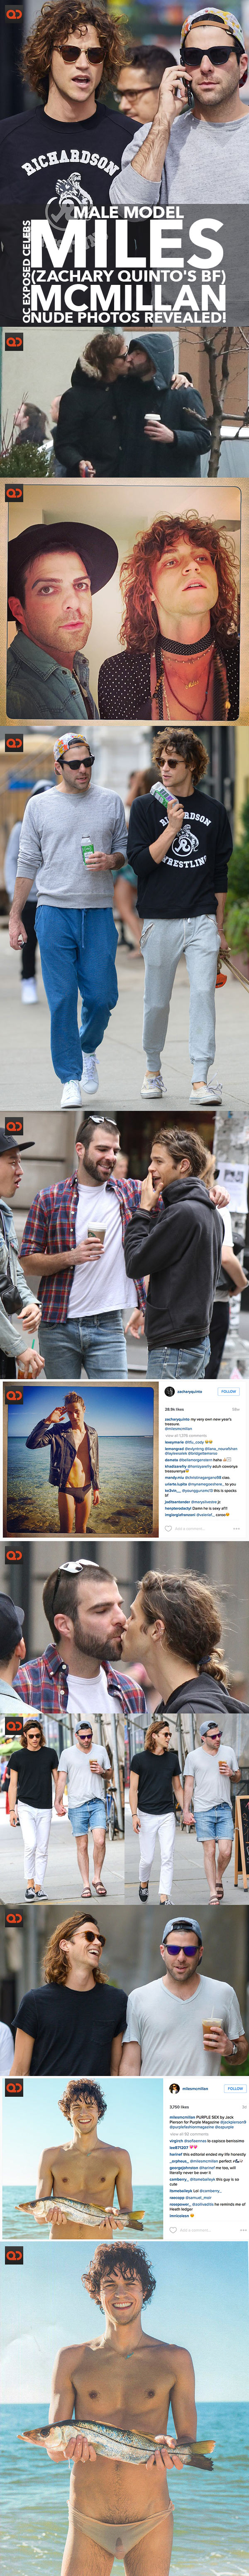 Male Model Miles McMillan, Zachary Quinto's Boyfriend, Nude Photos Revealed!